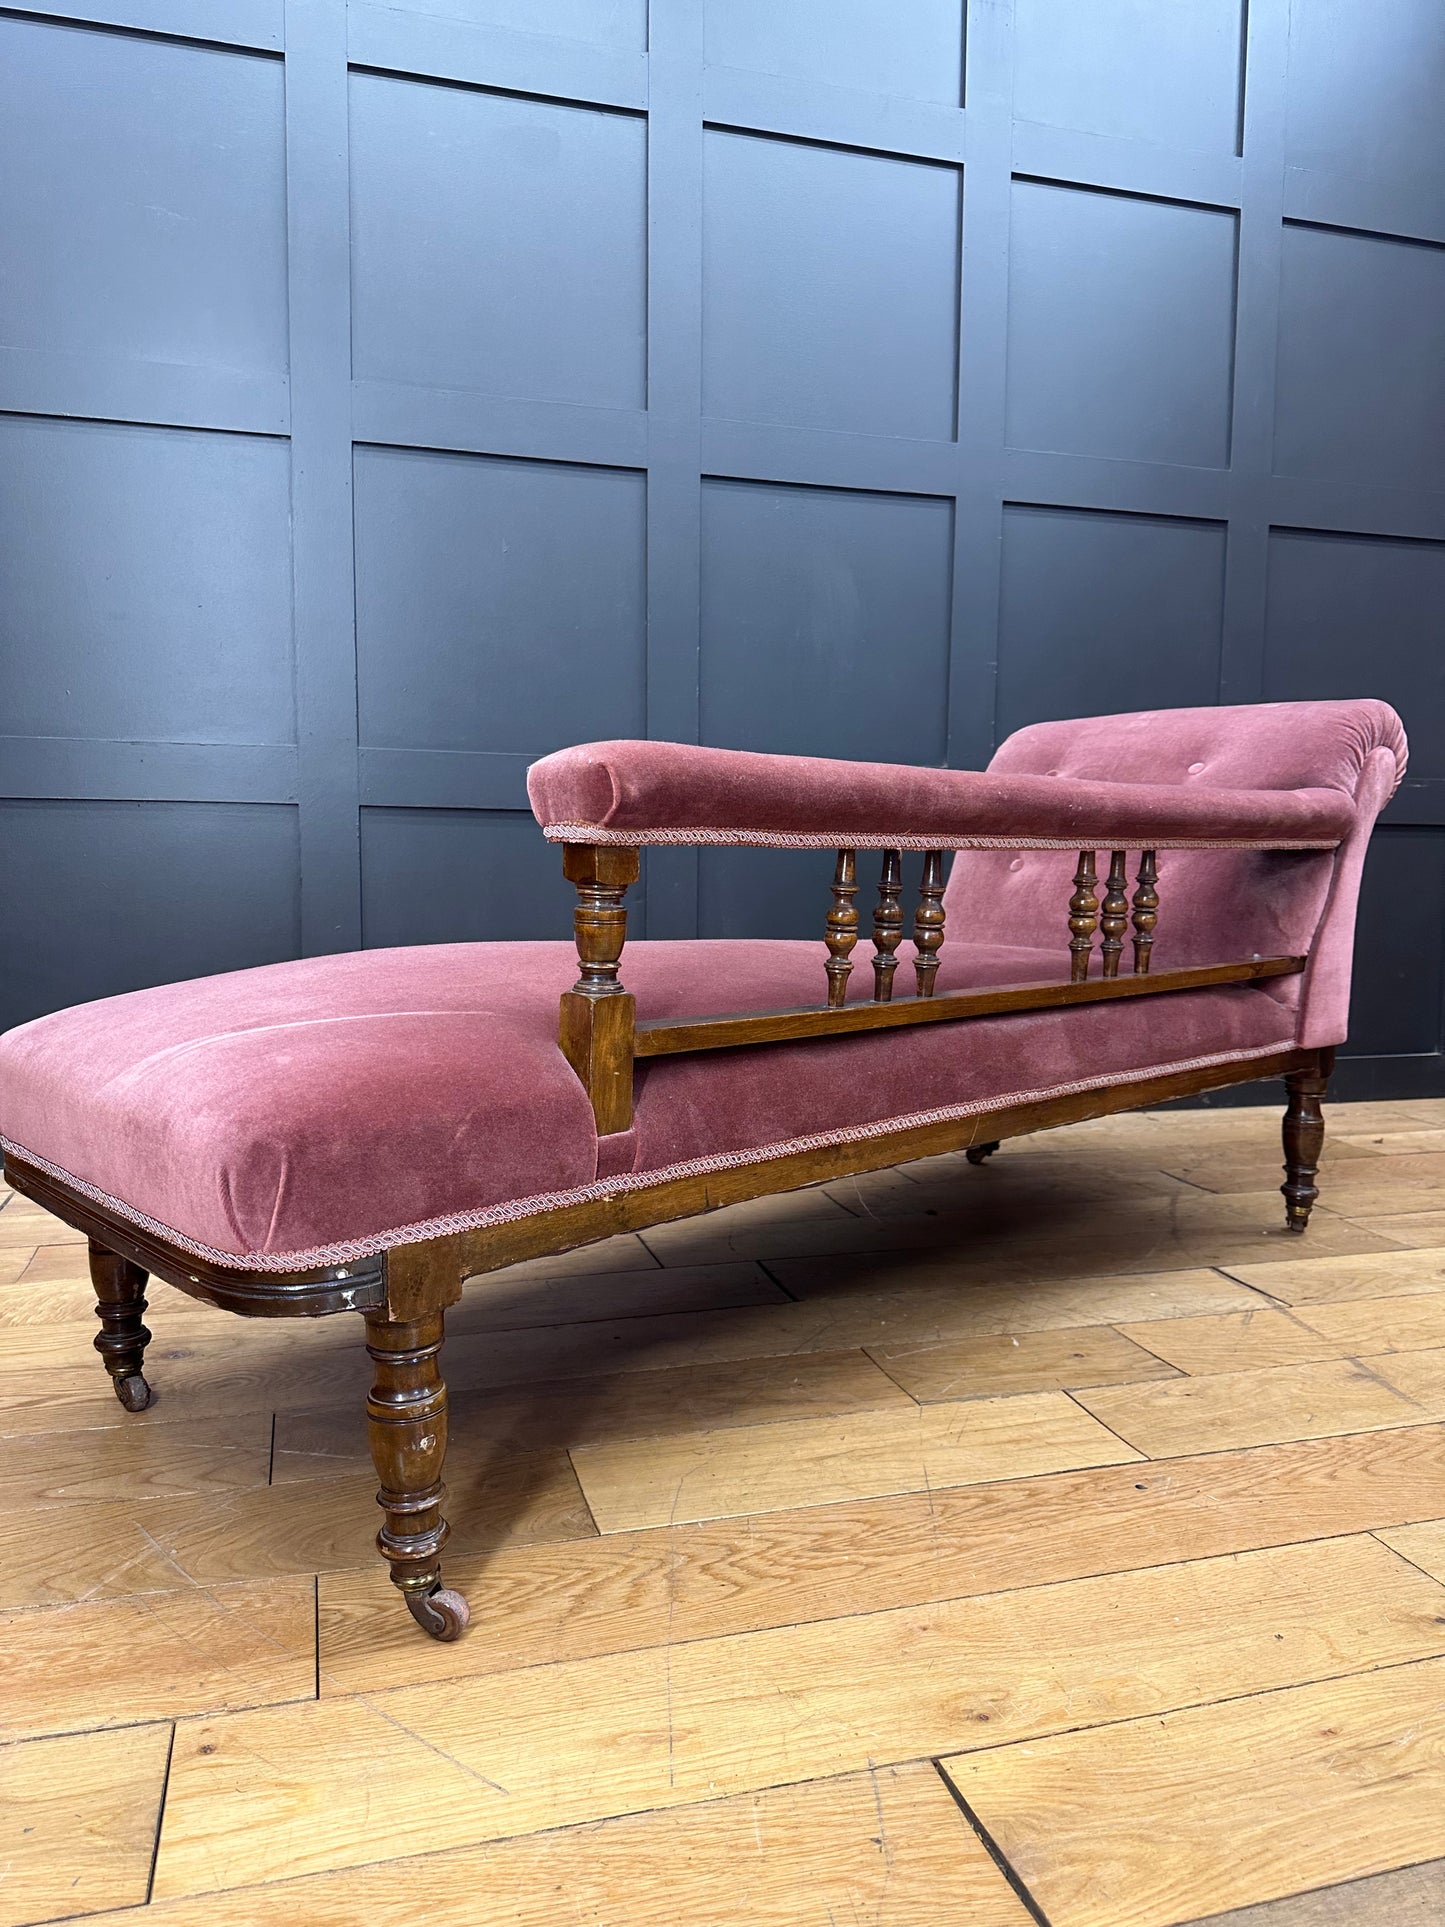 Antique Chaise Longue  / Antique Day Bed / Walnut Frame Sofa /Victorian Chaise